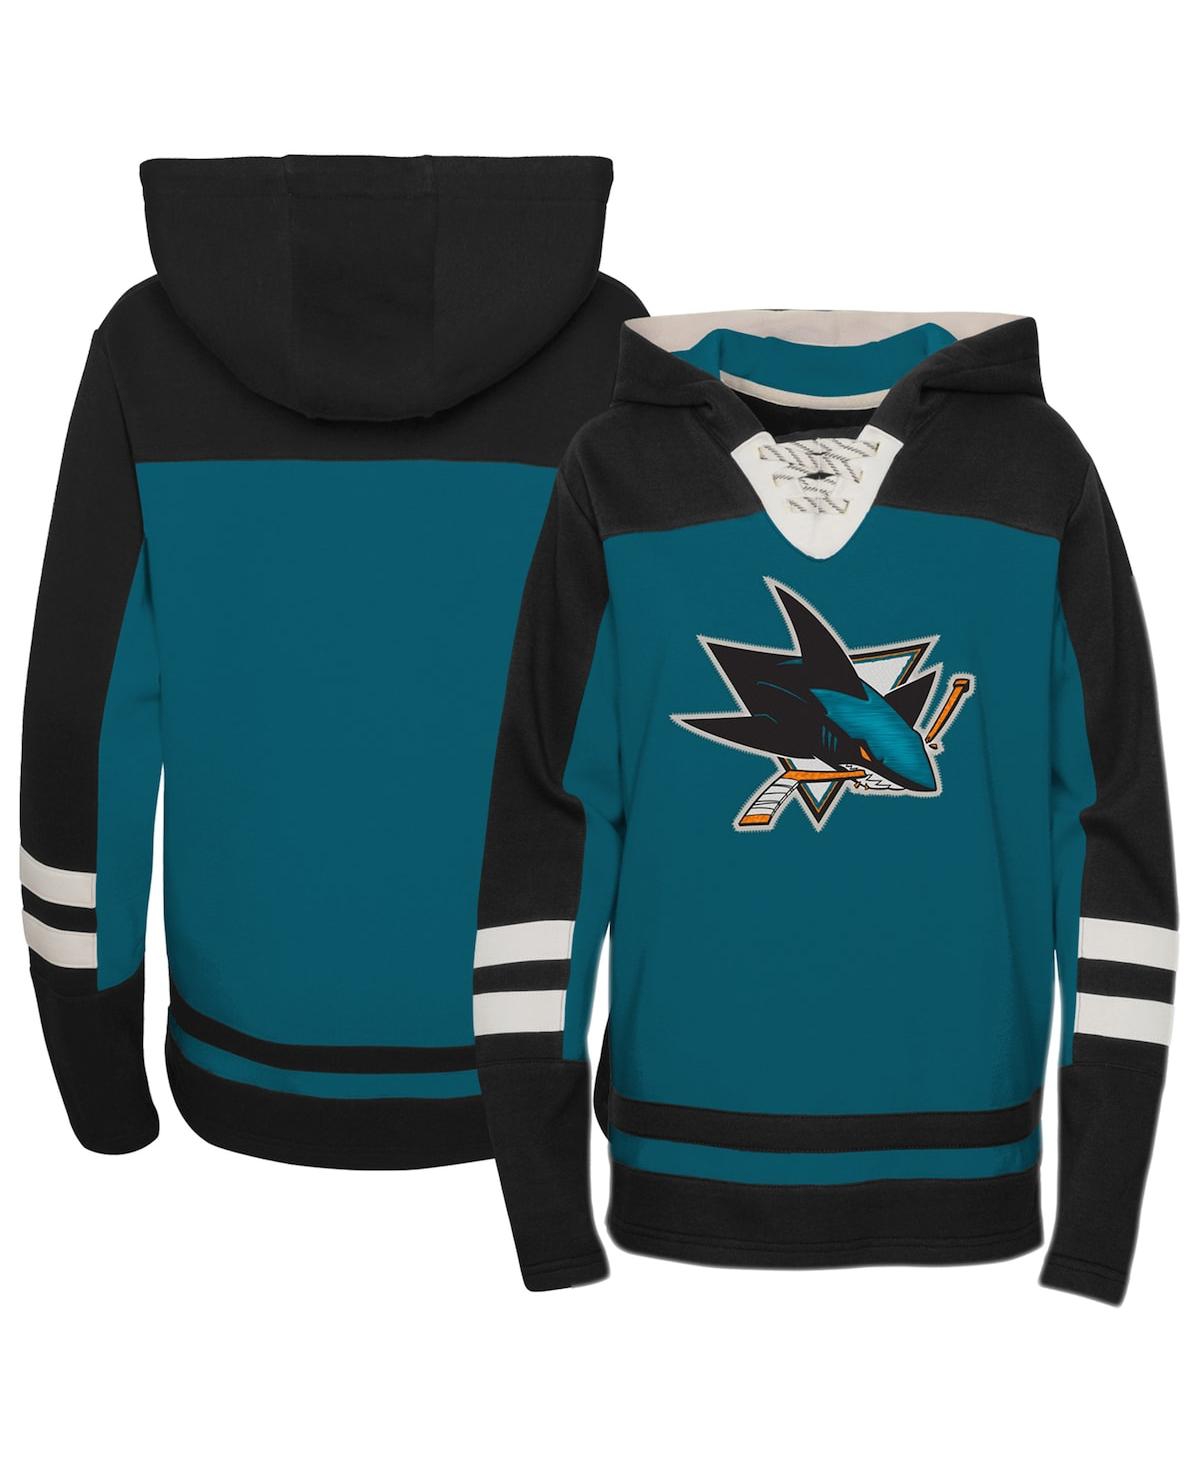 Outerstuff Babies' Preschool Boys And Girls Teal San Jose Sharks Ageless Revisited Lace-up V-neck Pullover Hoodie